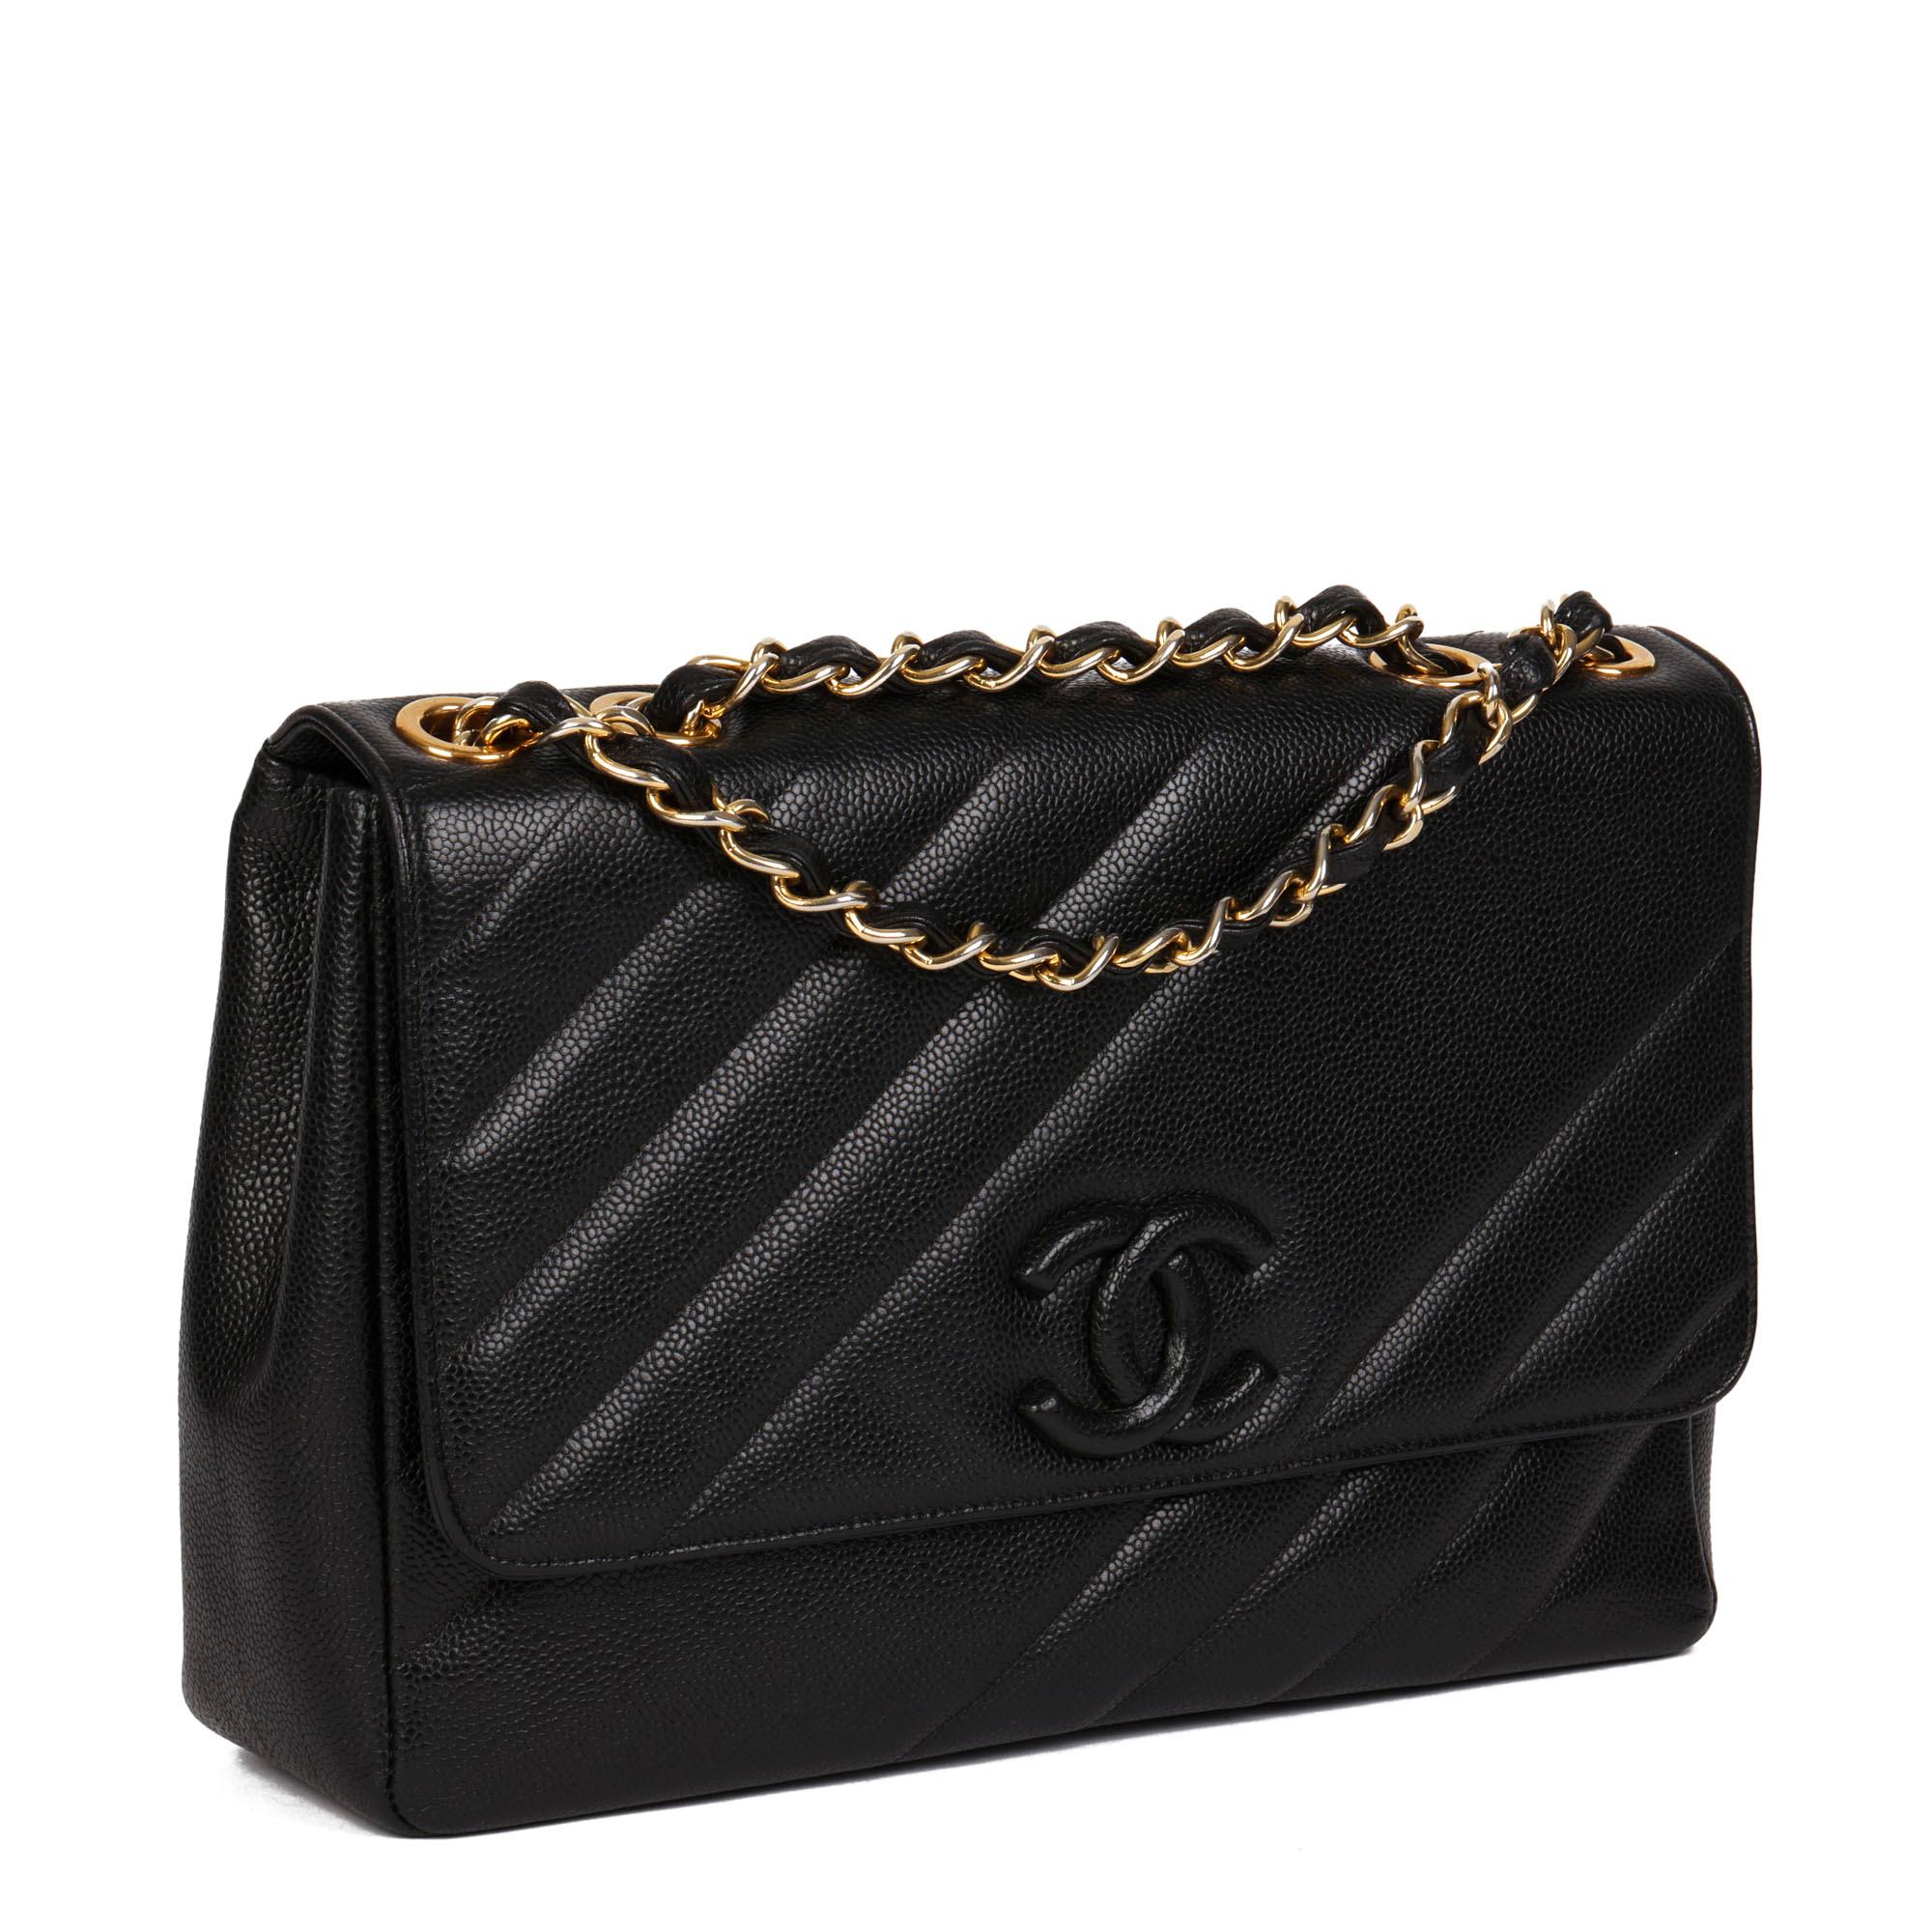 CHANEL
Black Diagonal Quilted Caviar Leather Vintage Jumbo Leather Logo Classic Single Flap Bag

Xupes Reference: HB4378
Serial Number: 3348247
Age (Circa): 1994
Accompanied By: Chanel Dust Bag, Authenticity Card, Care Booklet
Authenticity Details: